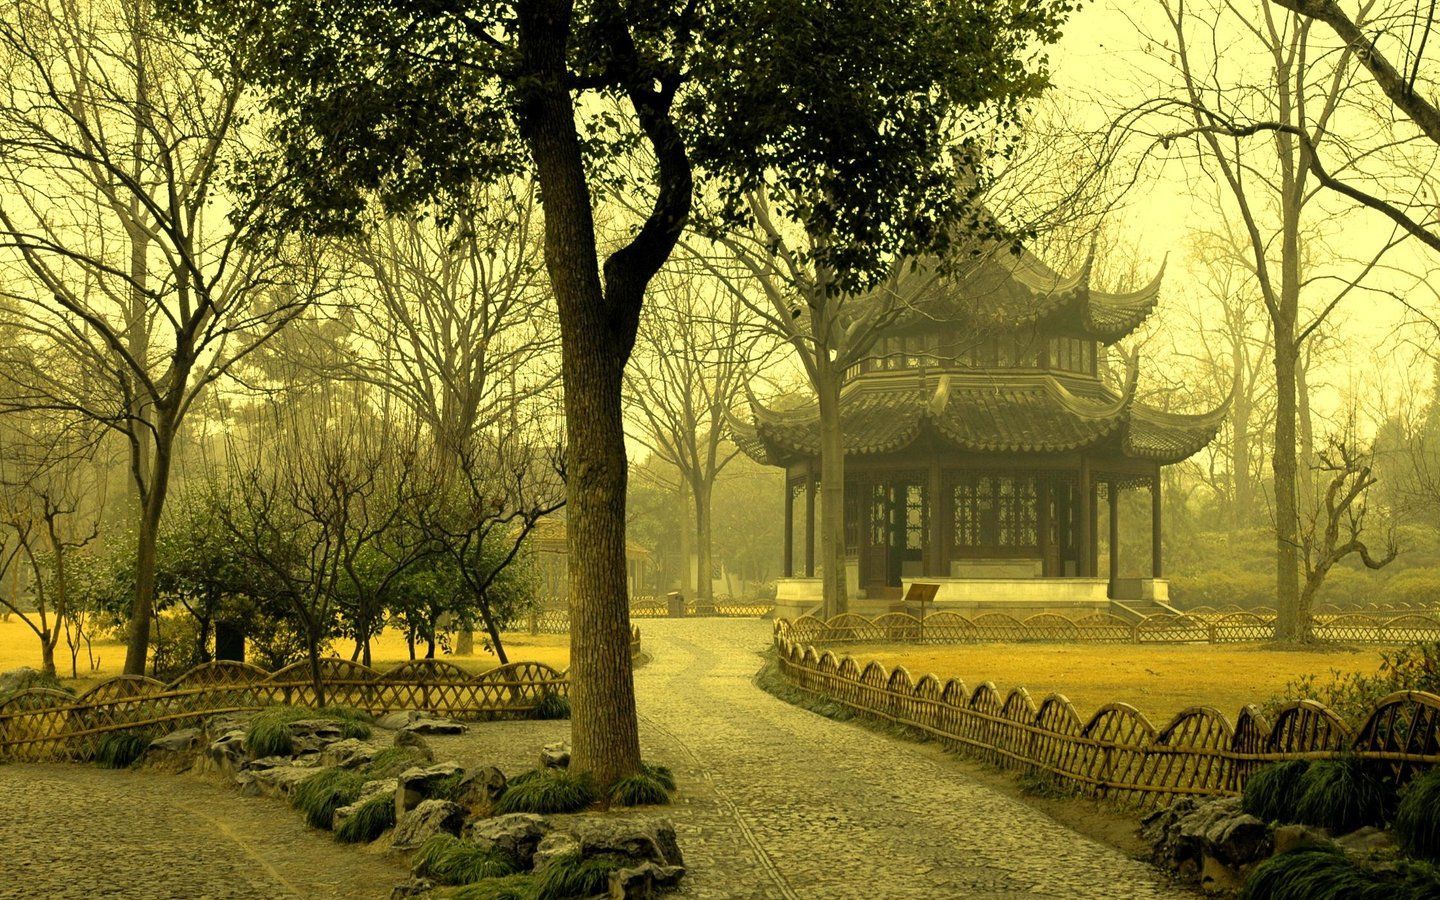 Chinese garden. Scenery wallpaper, Amazing nature photography, Landscape wallpaper